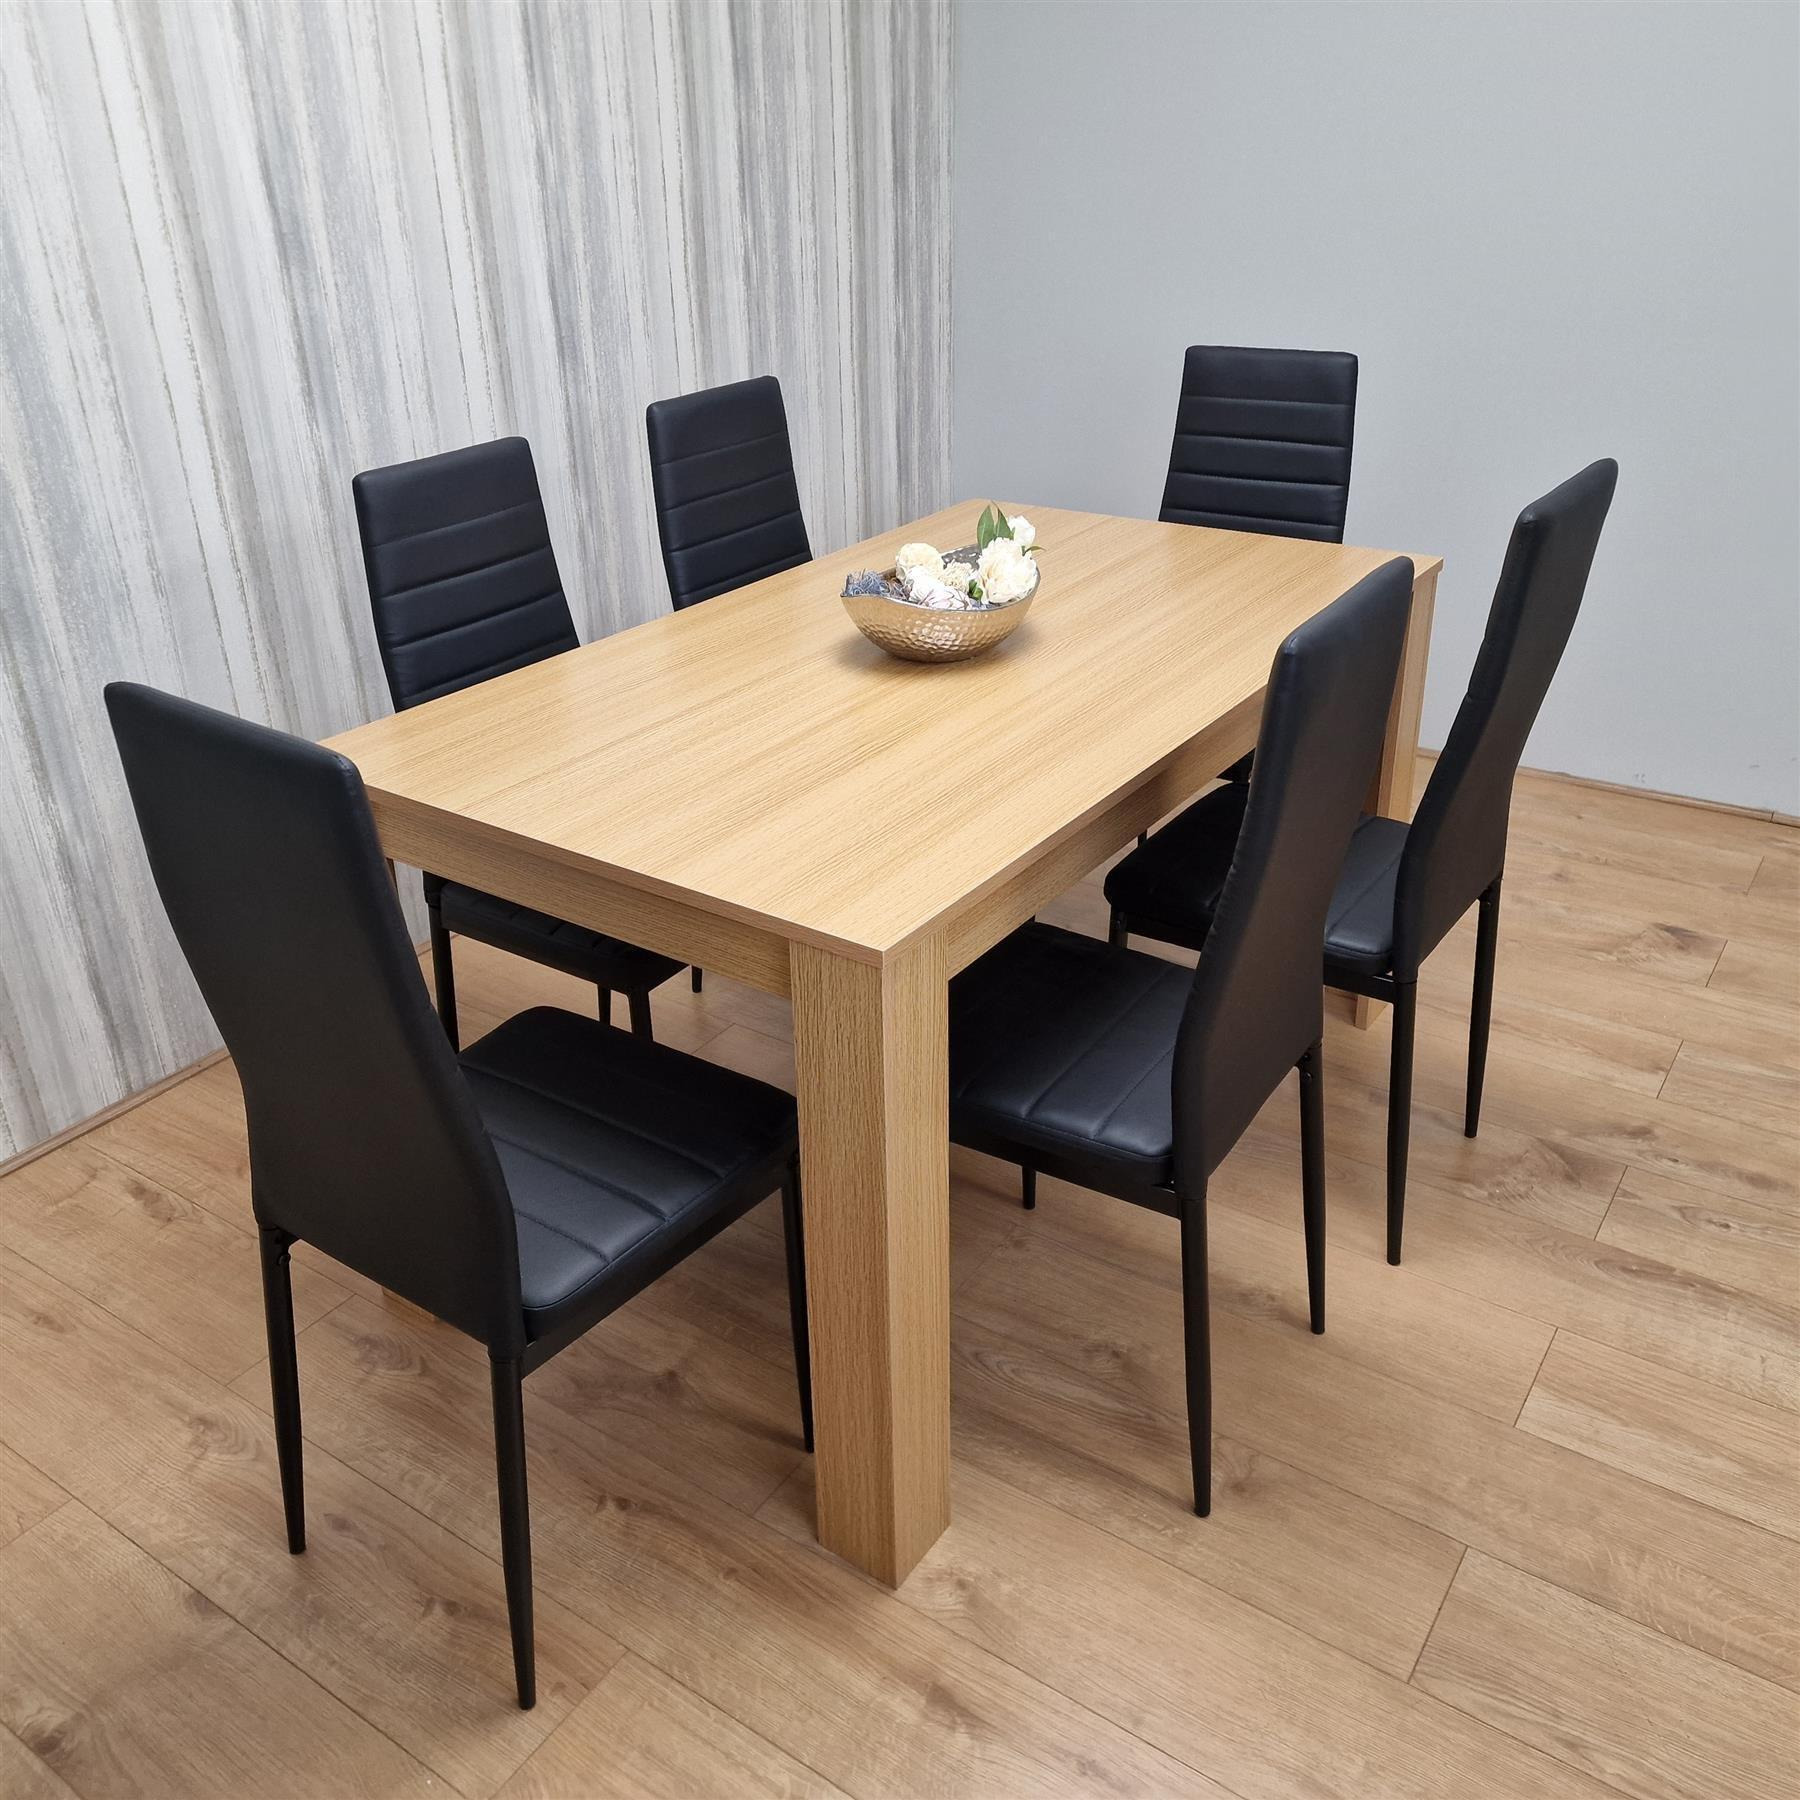 Dining Set of 6 Dining Table and 6 Black Faux leather Chairs Dinig Room Furniture - image 1